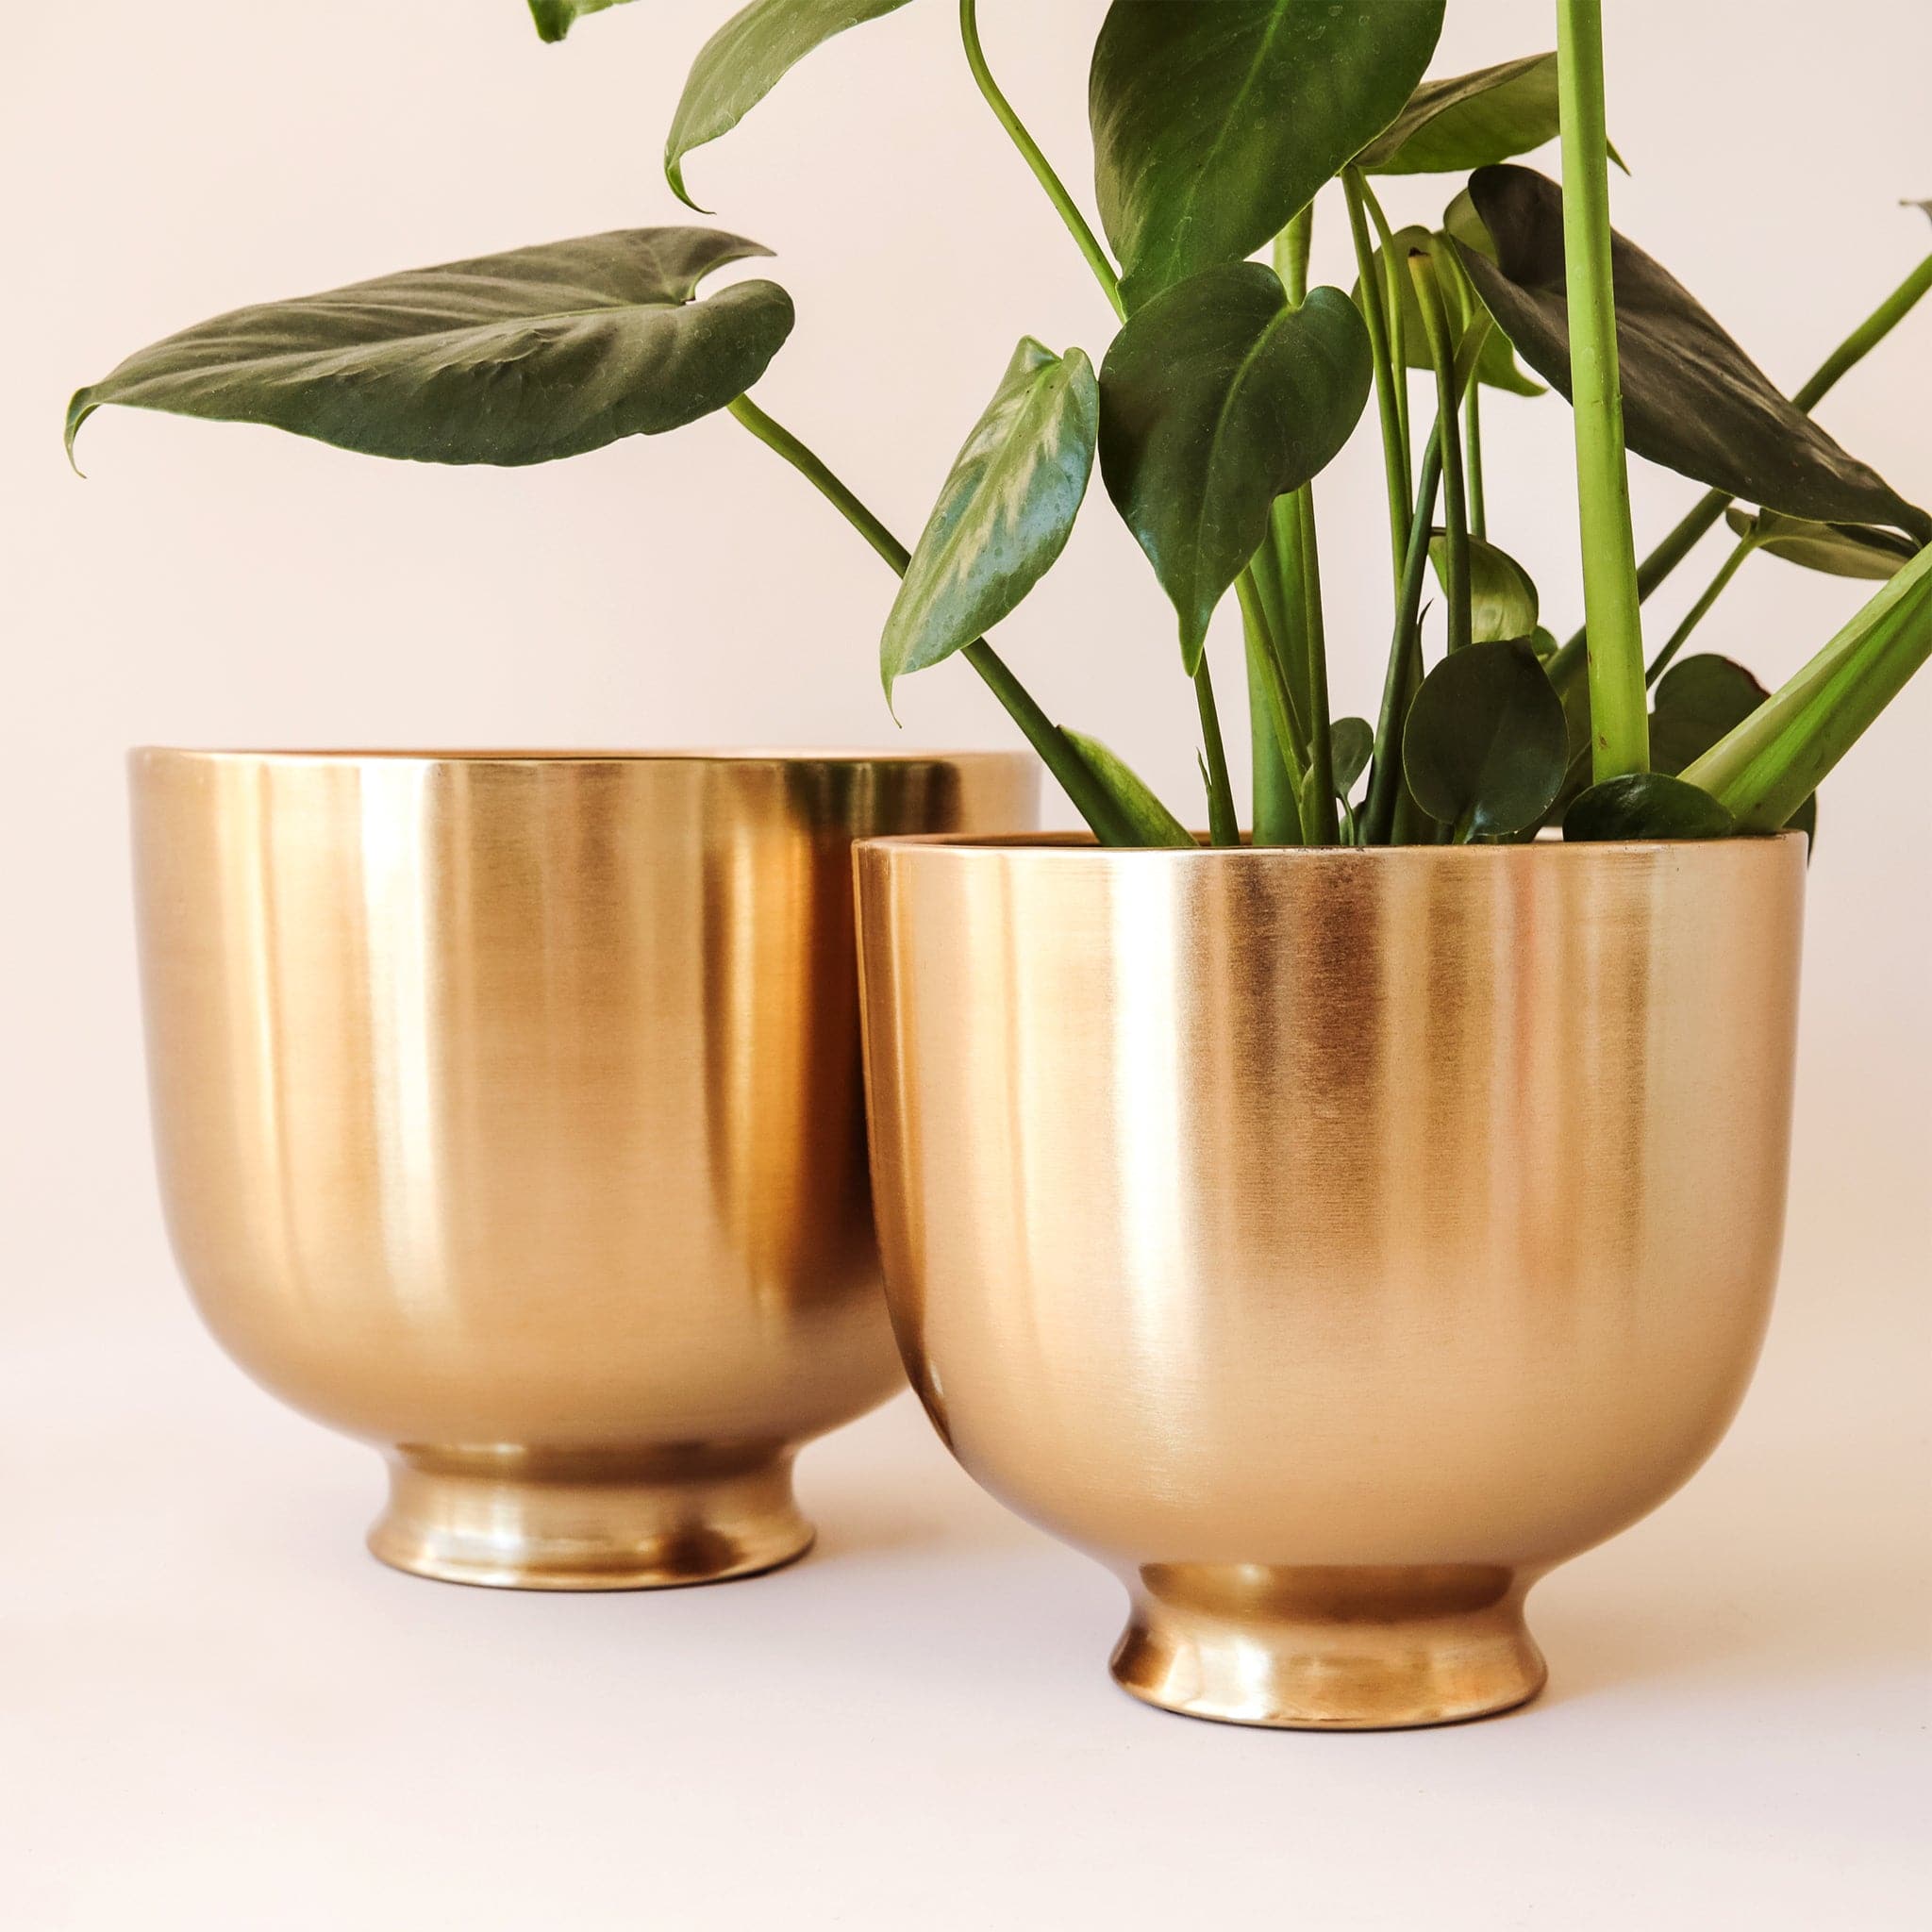 The sunglow planter has a gold metal finish, making it reflective to the light. It has a round shape with a tapered bottom. Shown planted is a monstera plant which has beautiful contrasting colors to the pot.